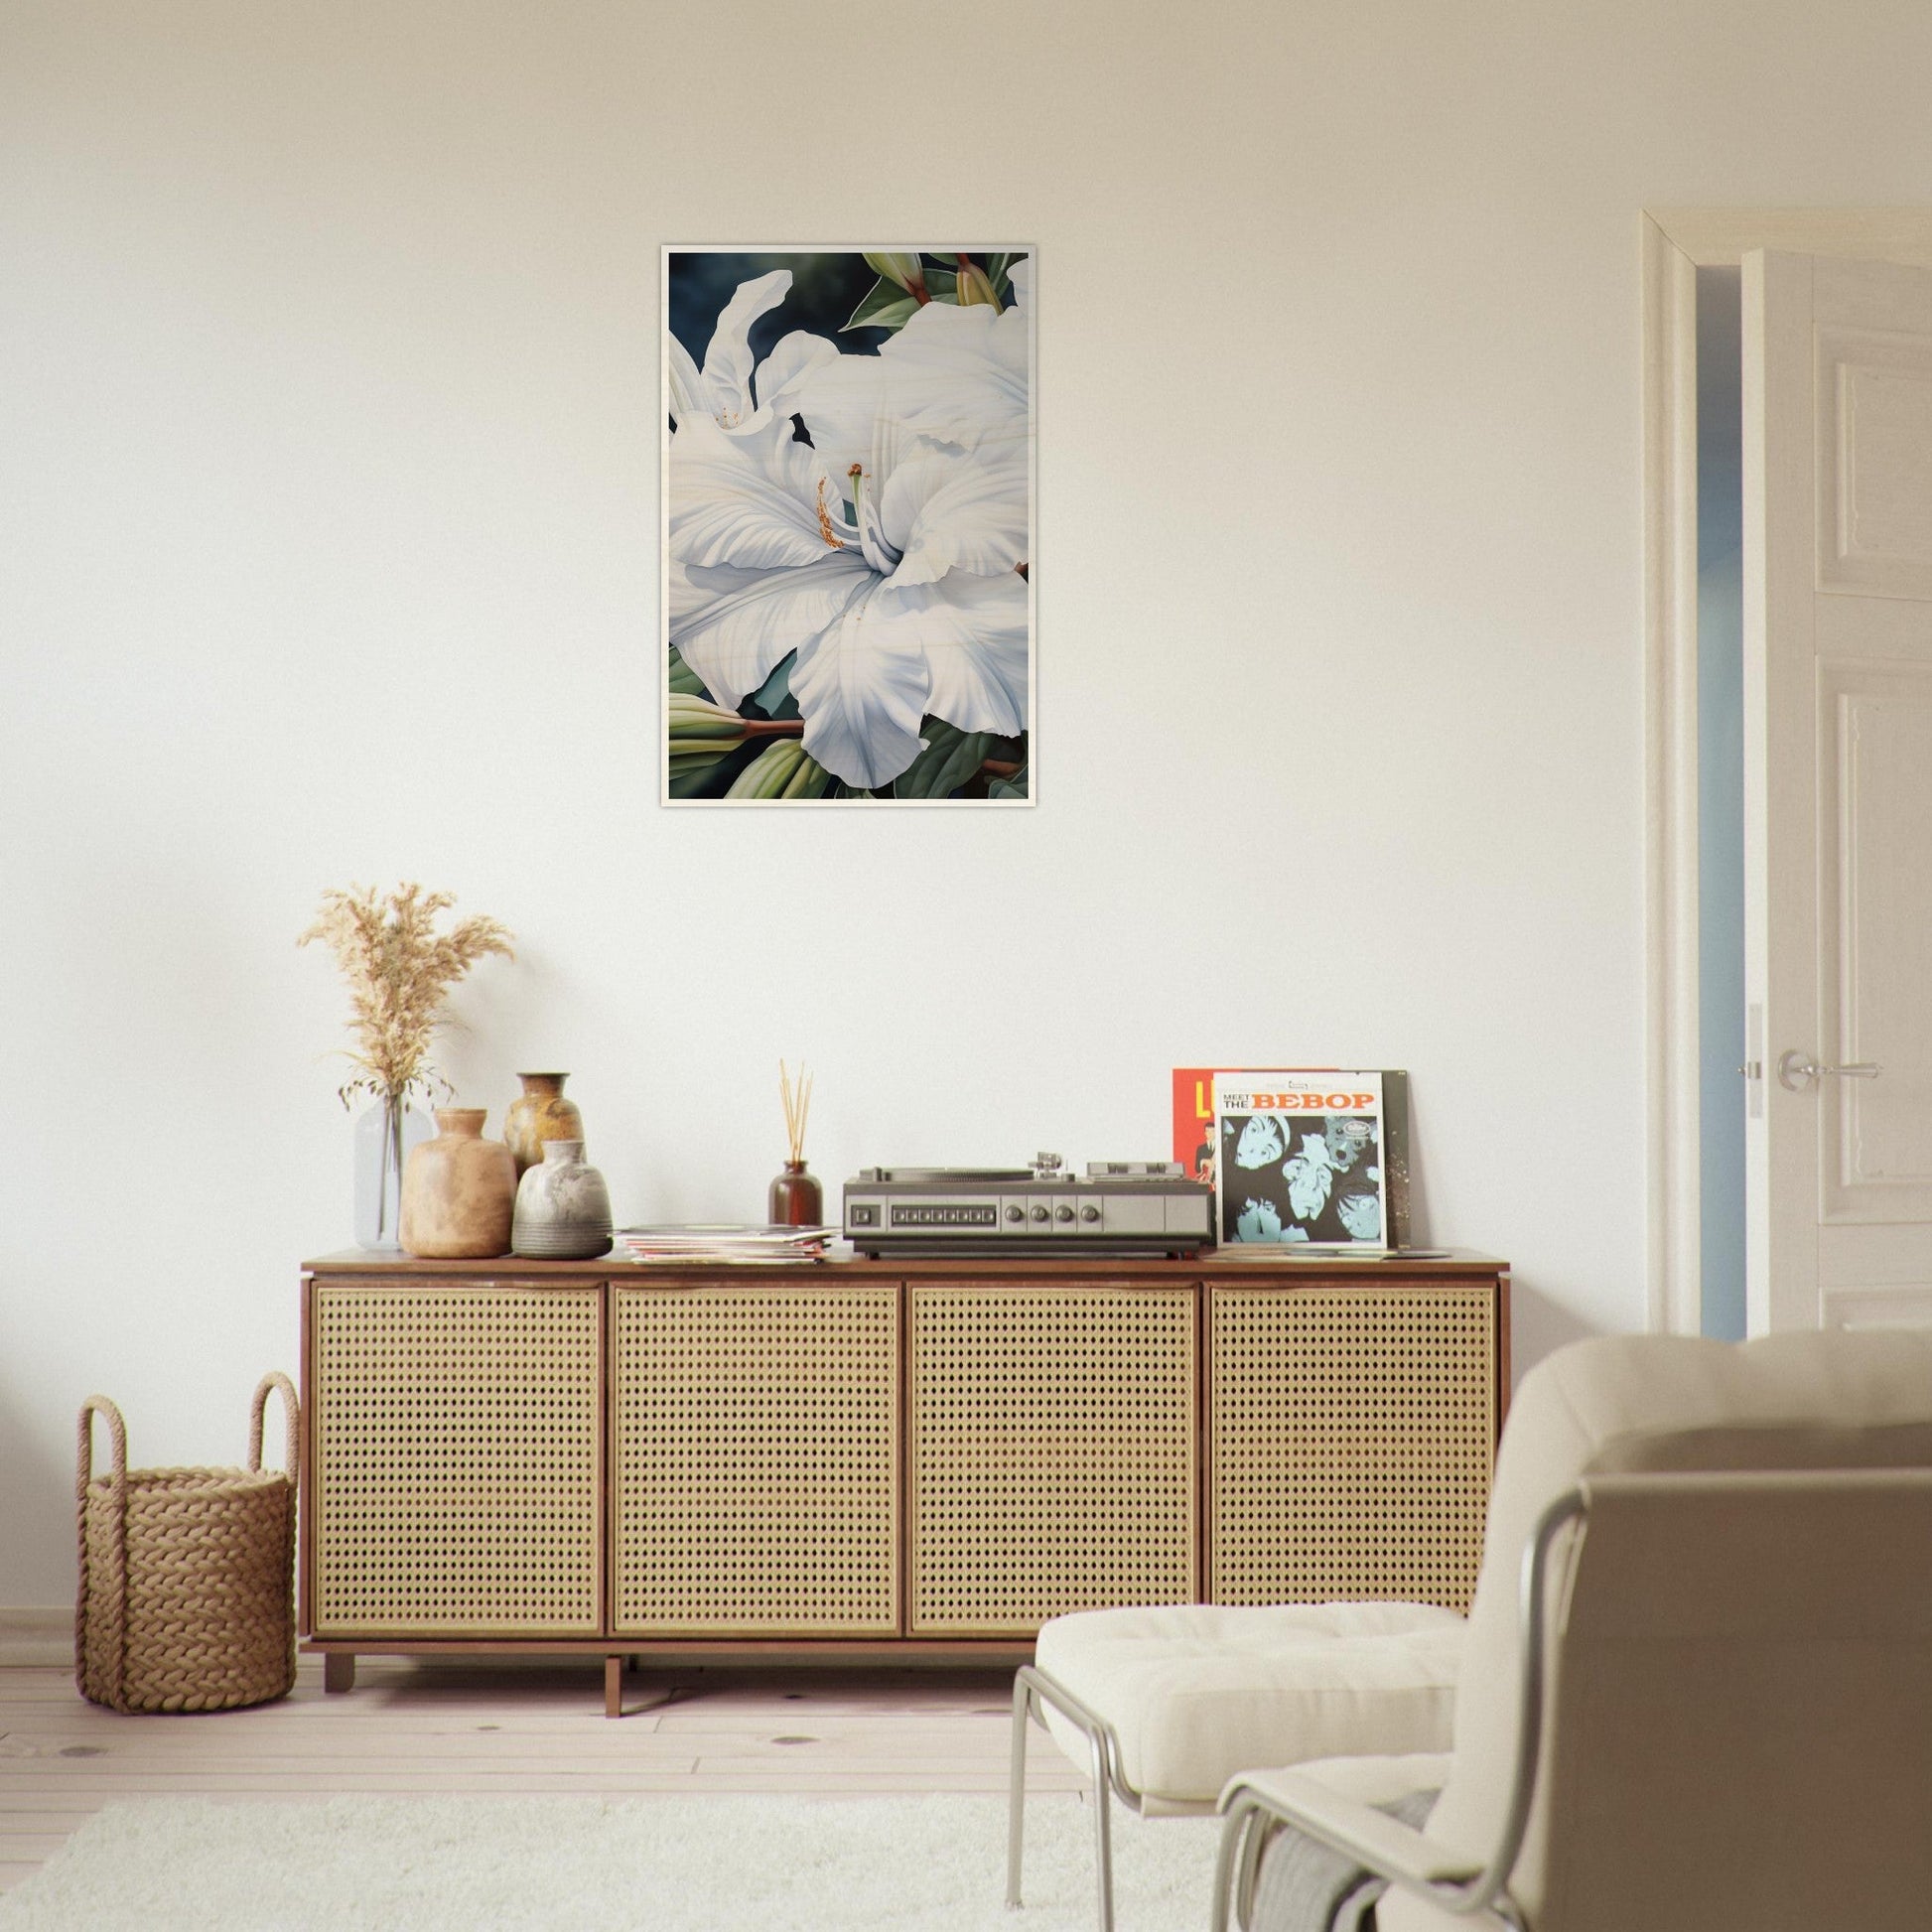 A fashion wall art poster featuring White And Green - Wood Prints on a wooden board, perfect to transform your space.